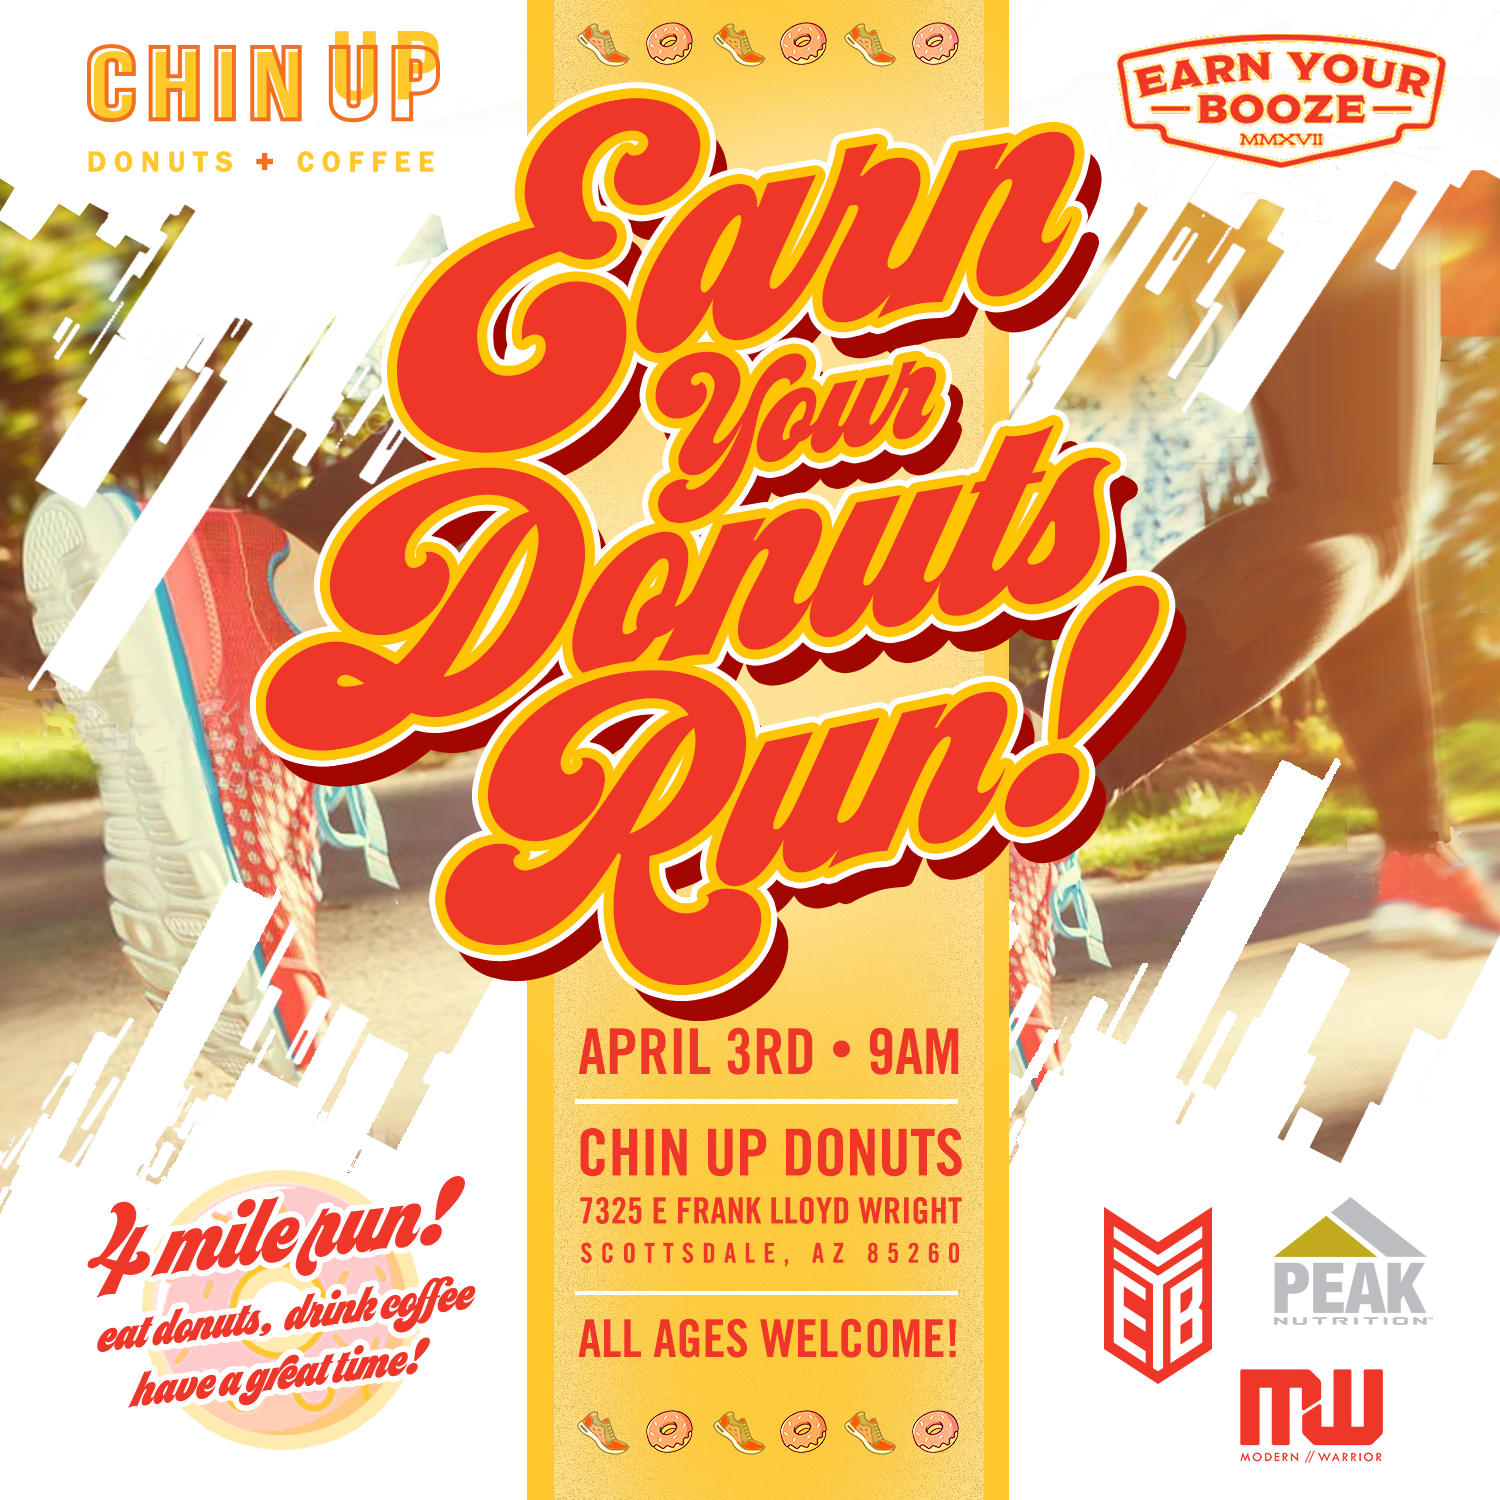 EARN YOUR DONUTS RUN! w/ Chin Up donuts | Scottsdale